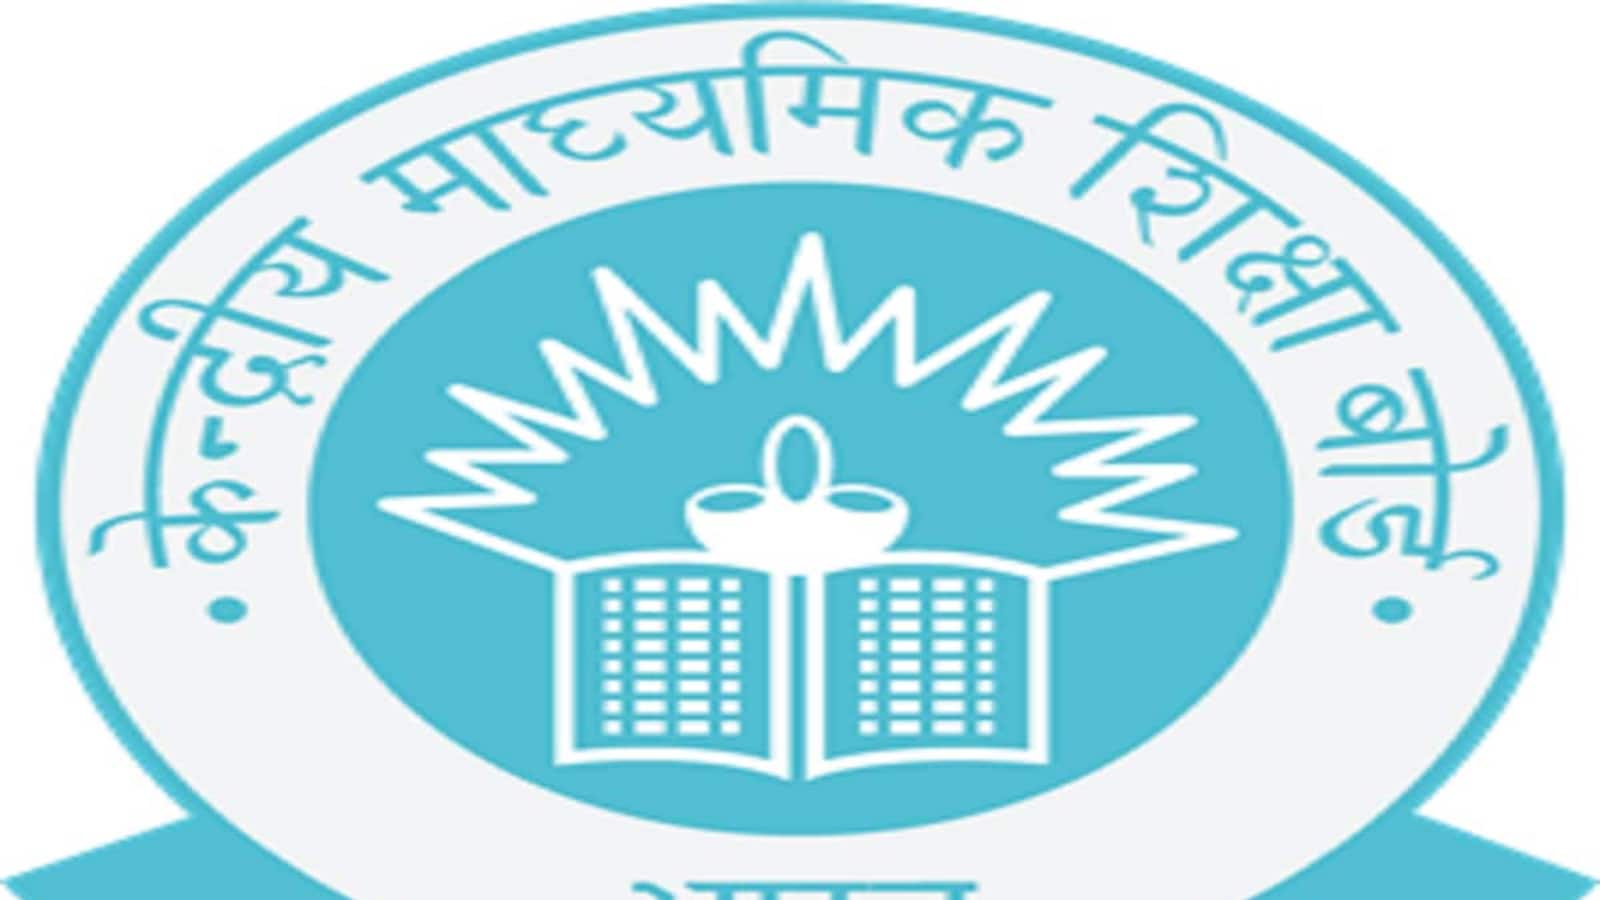 CBSE invites applications for Single Girl Child Scholarship X 2023, renewal portal open for 2022 awardees